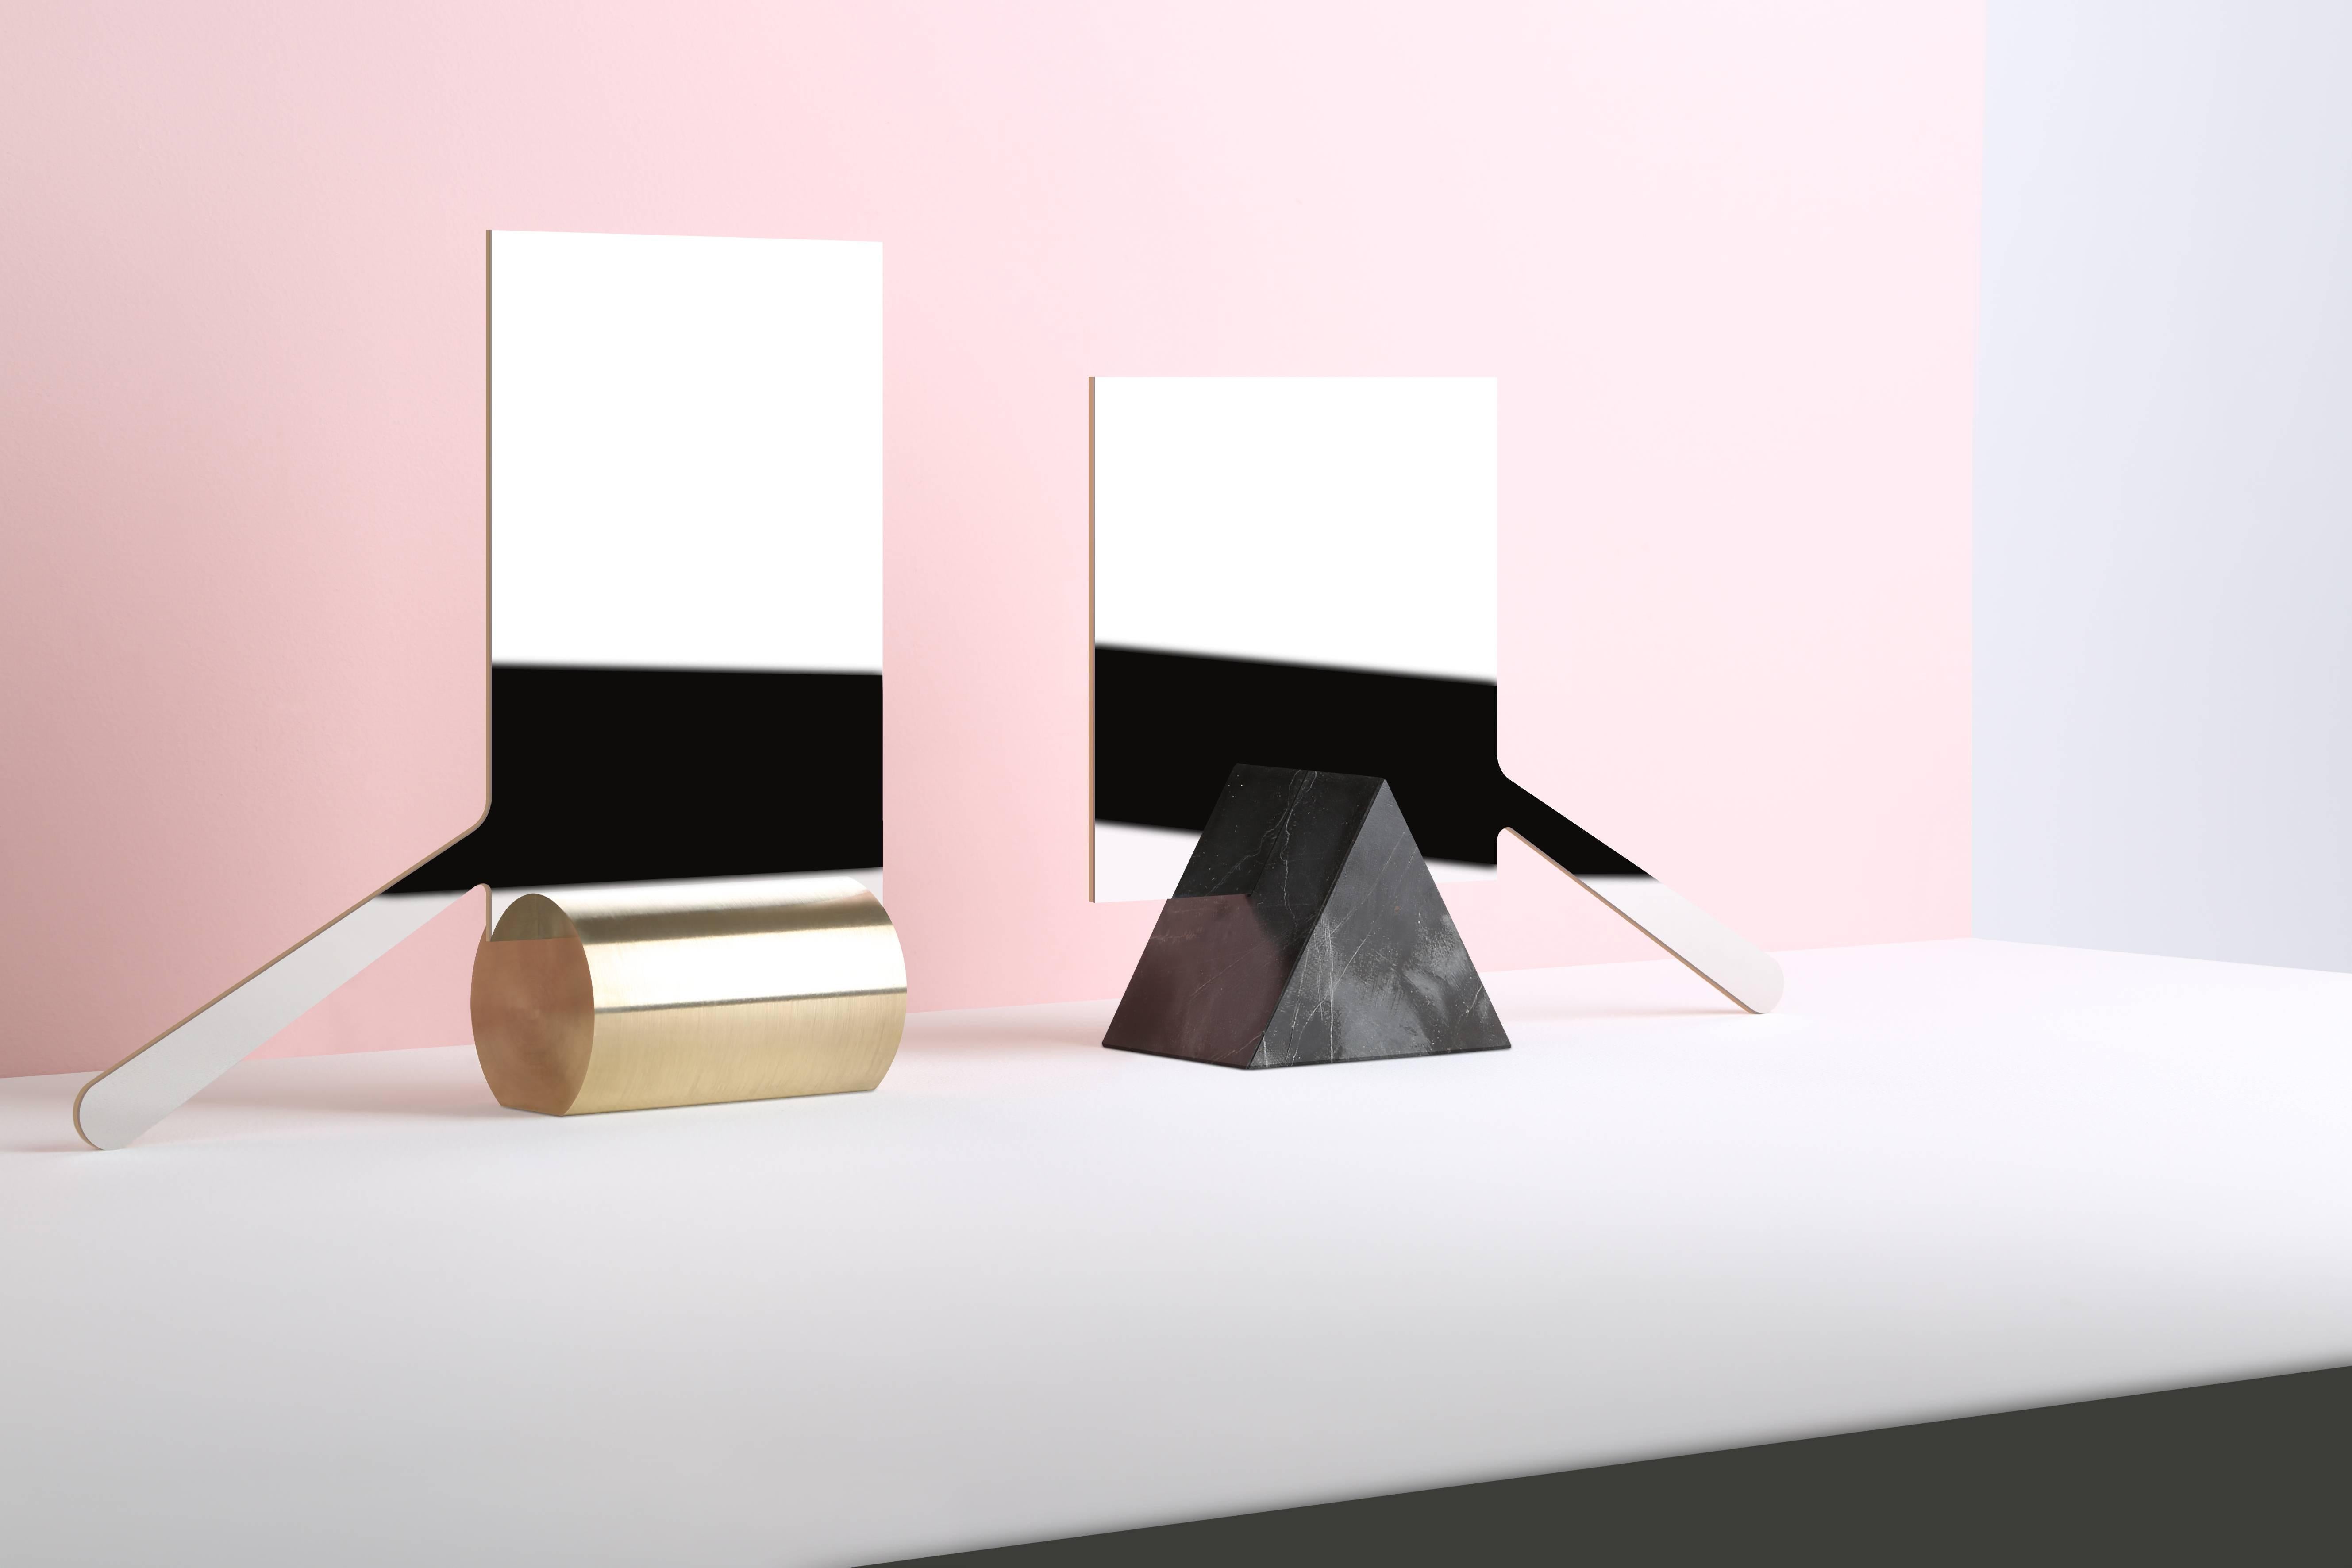 Mirrors collection by Lebanese designer Richard Yasmine
Super-mirrored polished stainless steel sheet – Marble, brass or metal pedestal
Variable dimensions depending on different models. 

Square model:
12 x 12 x 0.3 cm
(Cylindrical base: 8 x